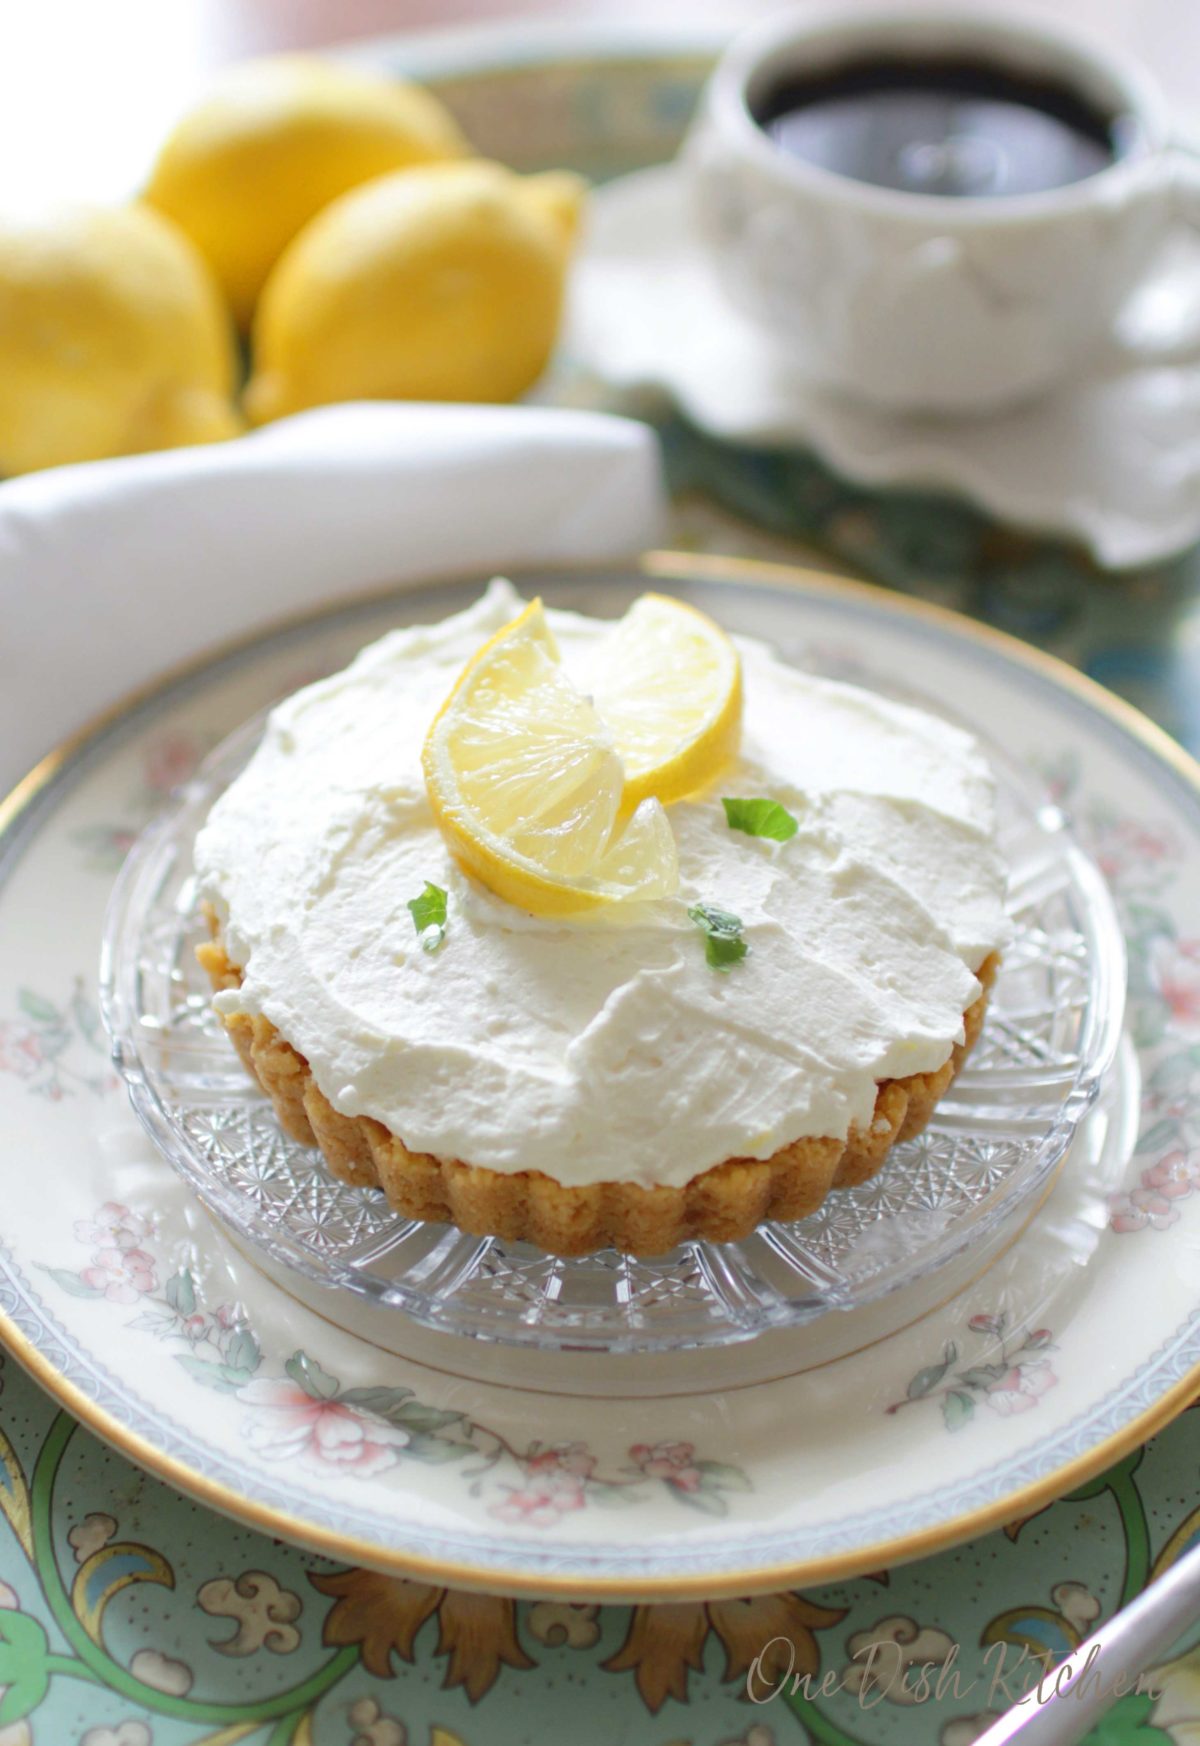 Lemon cheesecake mousse garnished with thin lemon slices on a glass plate with three whole lemons in the background on a metal tray